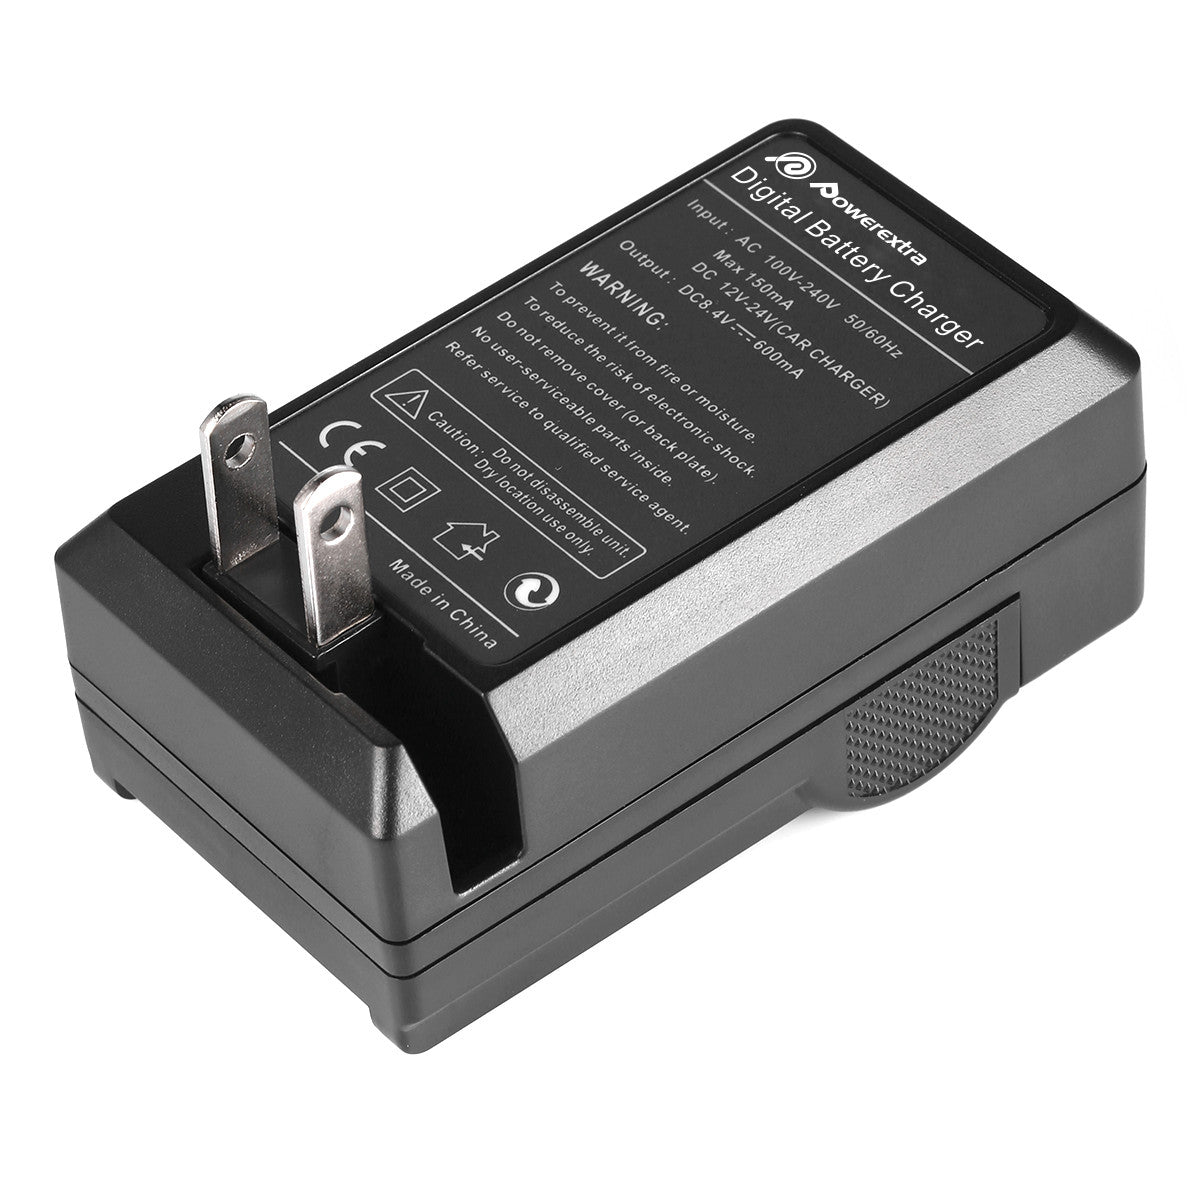 Powerextra BP-511 BP-511A Battery Charger For Canon